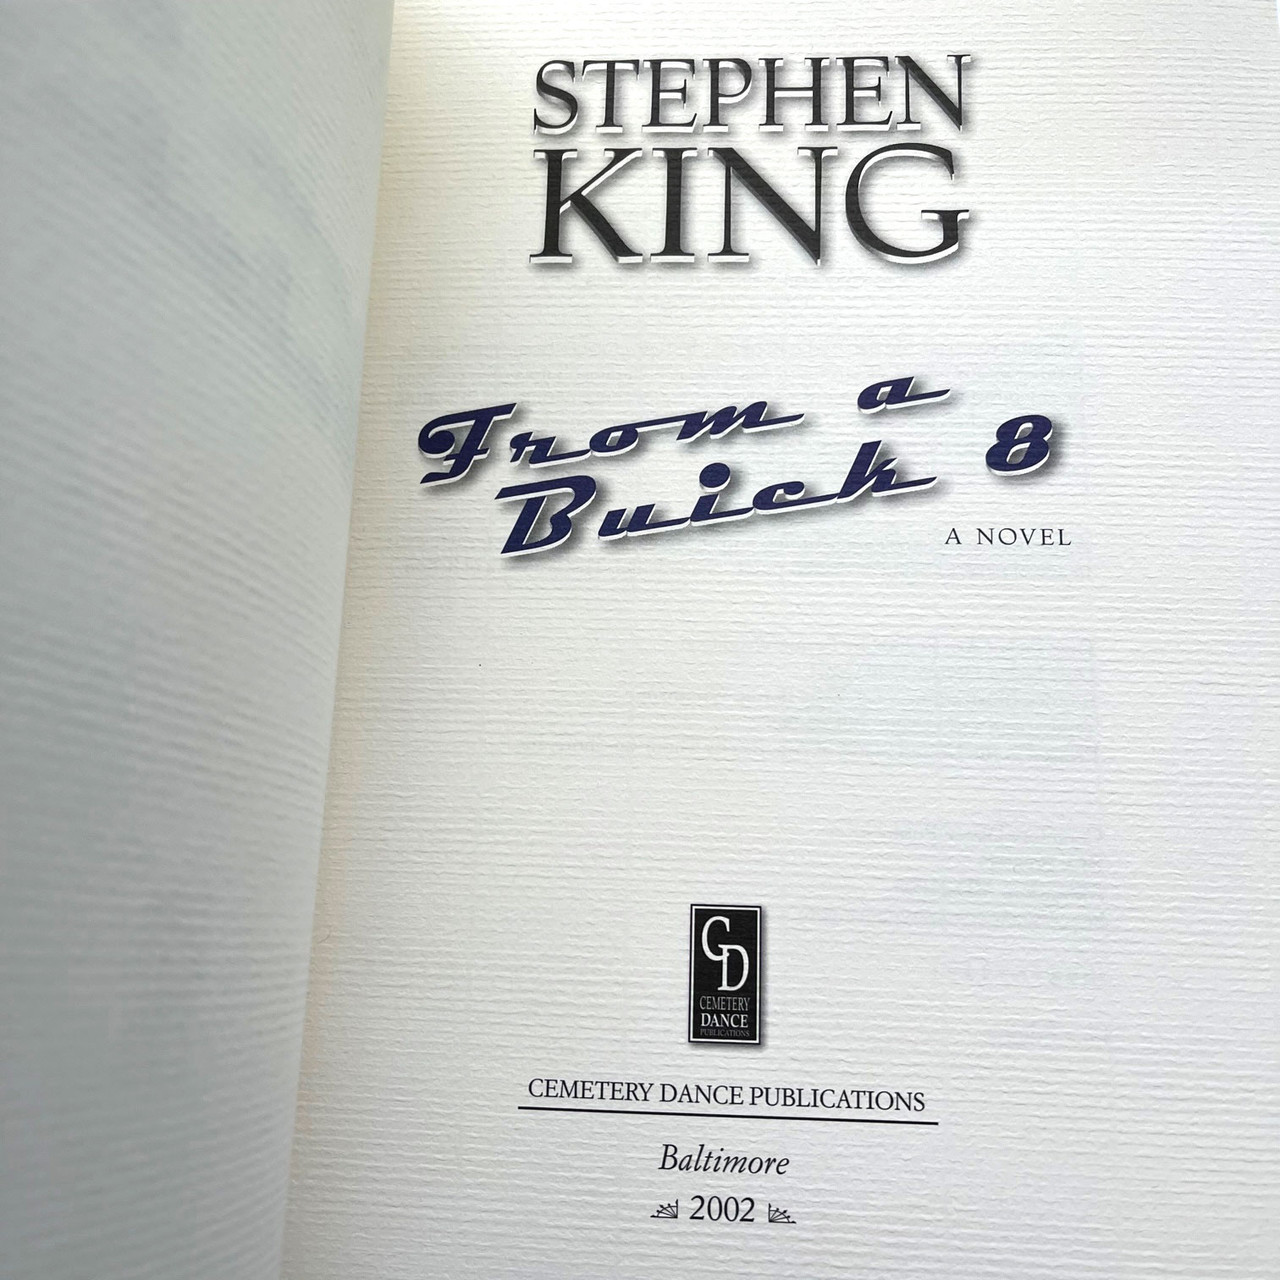 Stephen King "From A Buick 8" Signed Limited First Edition, Leather Bound Tray-cased No. 45 of 750